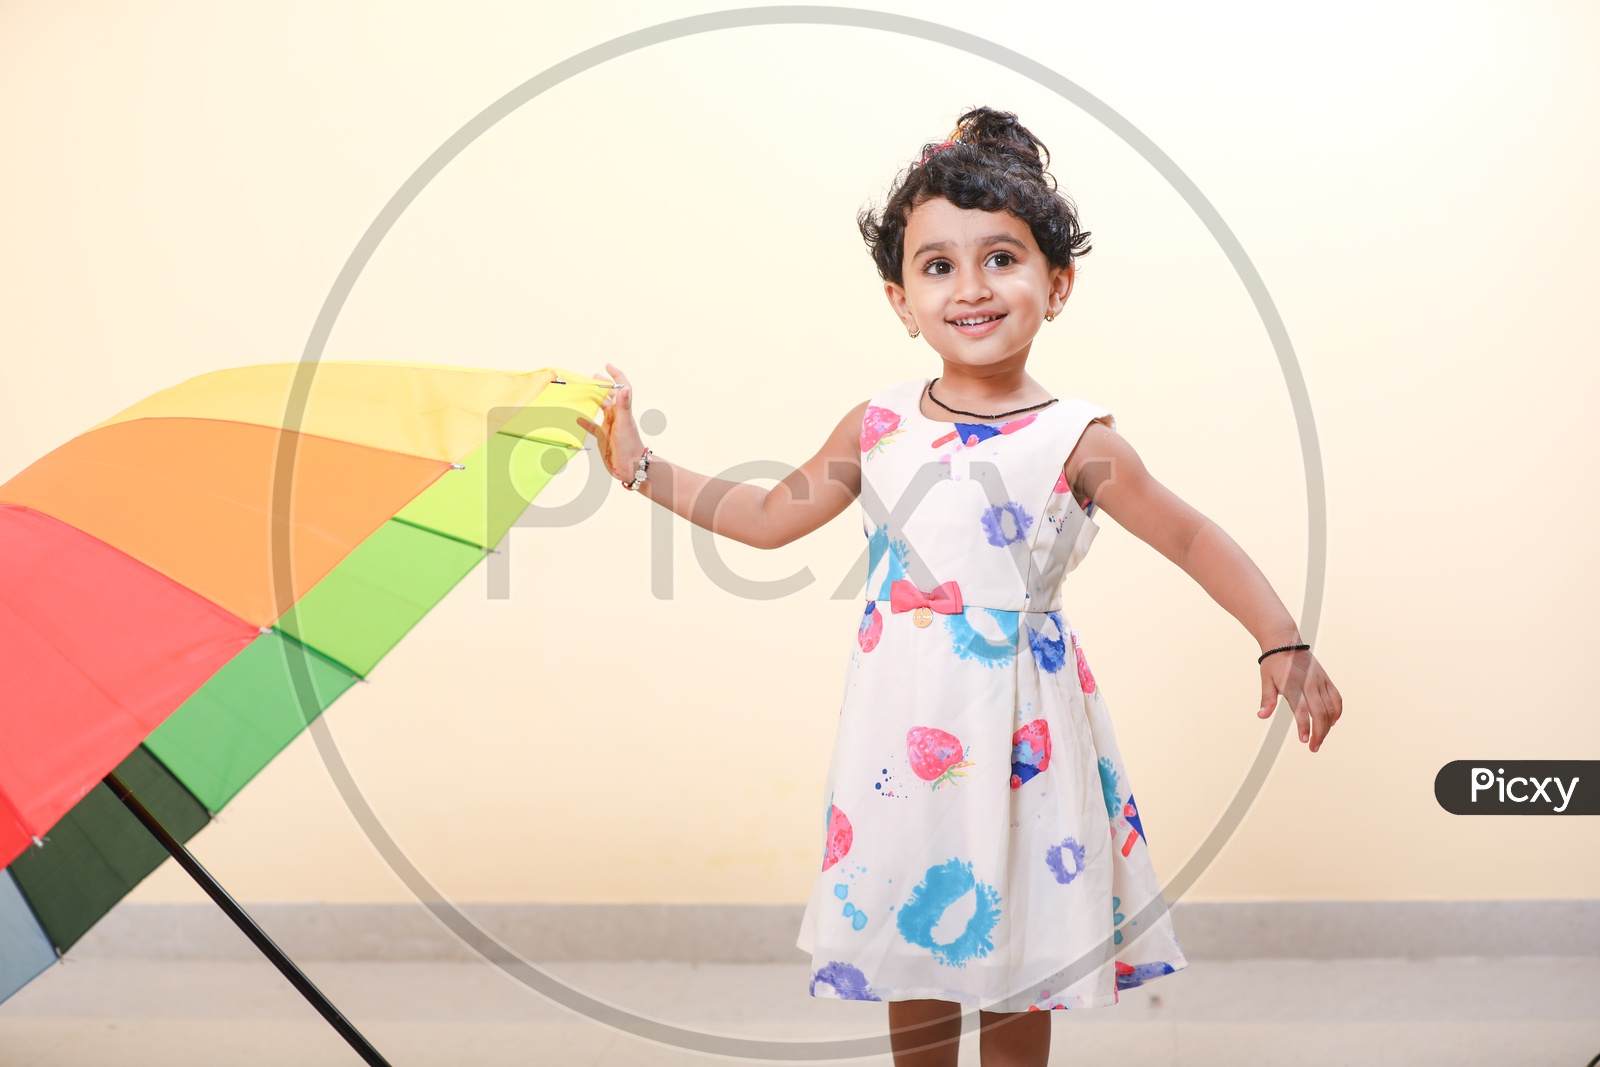 Indian Girl Child with Umbrella and smiling face